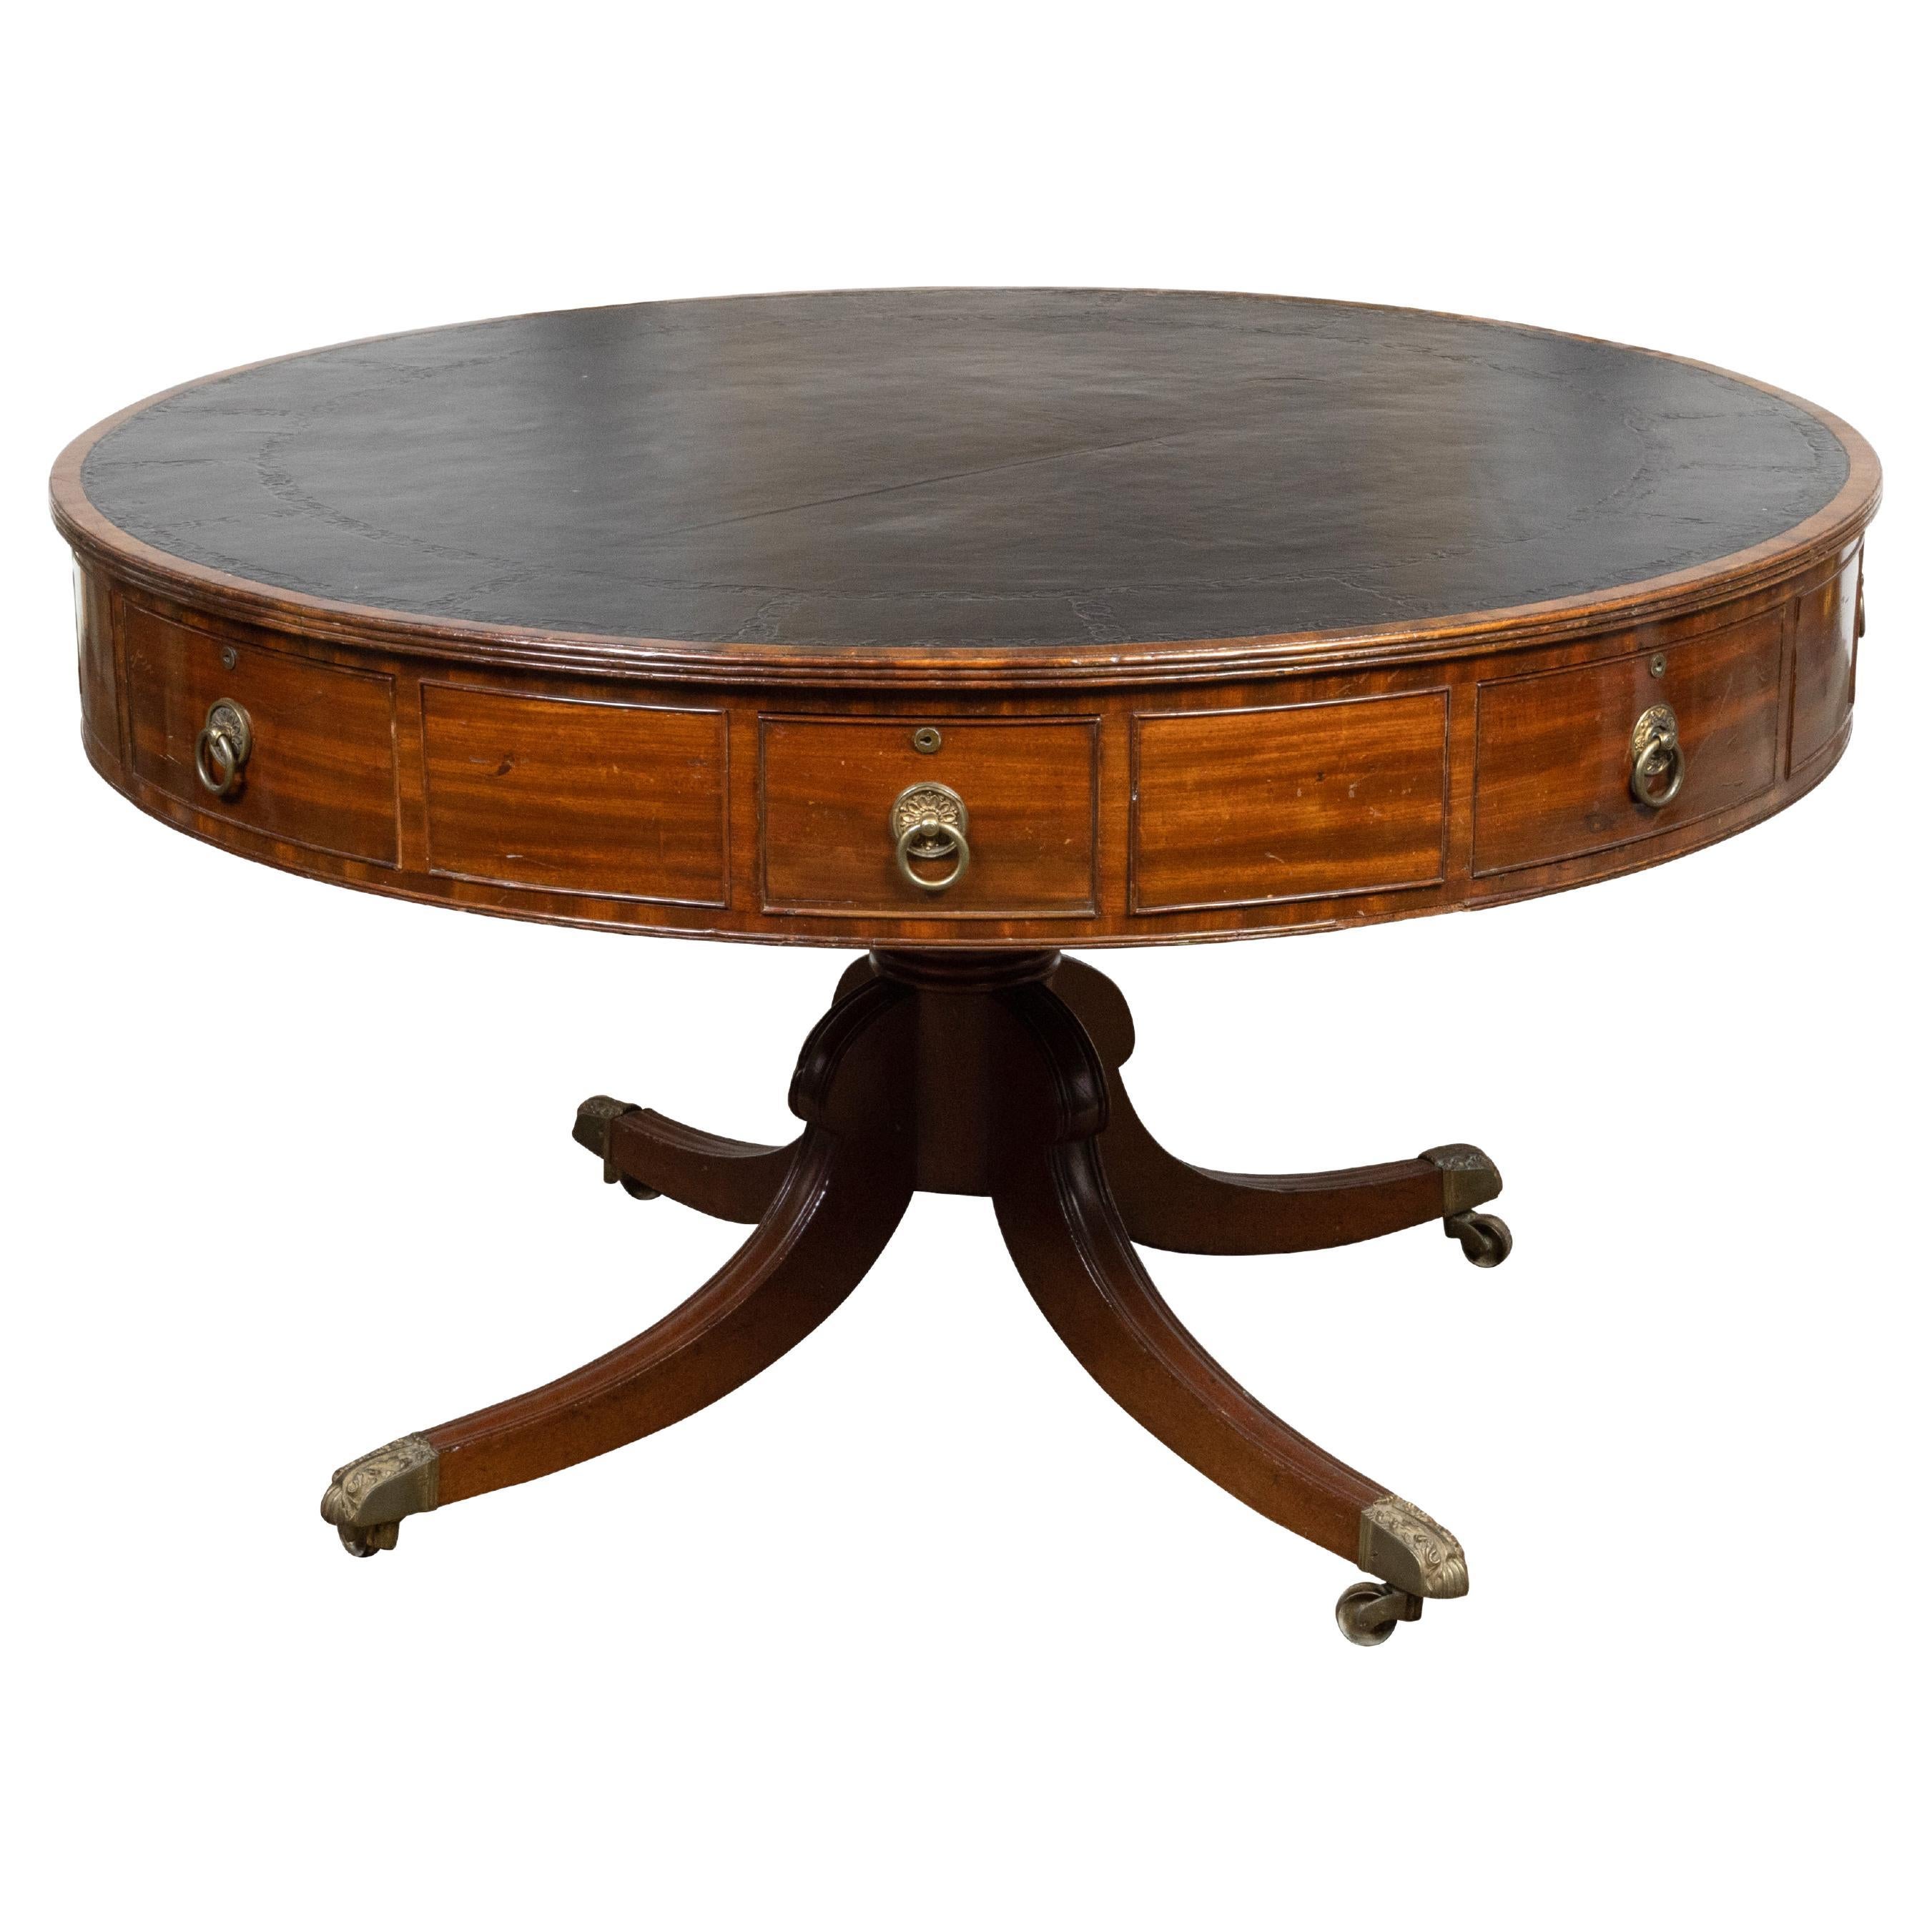 English Regency 1840s Mahogany Rent Table with Leather Top and Eight Drawers For Sale